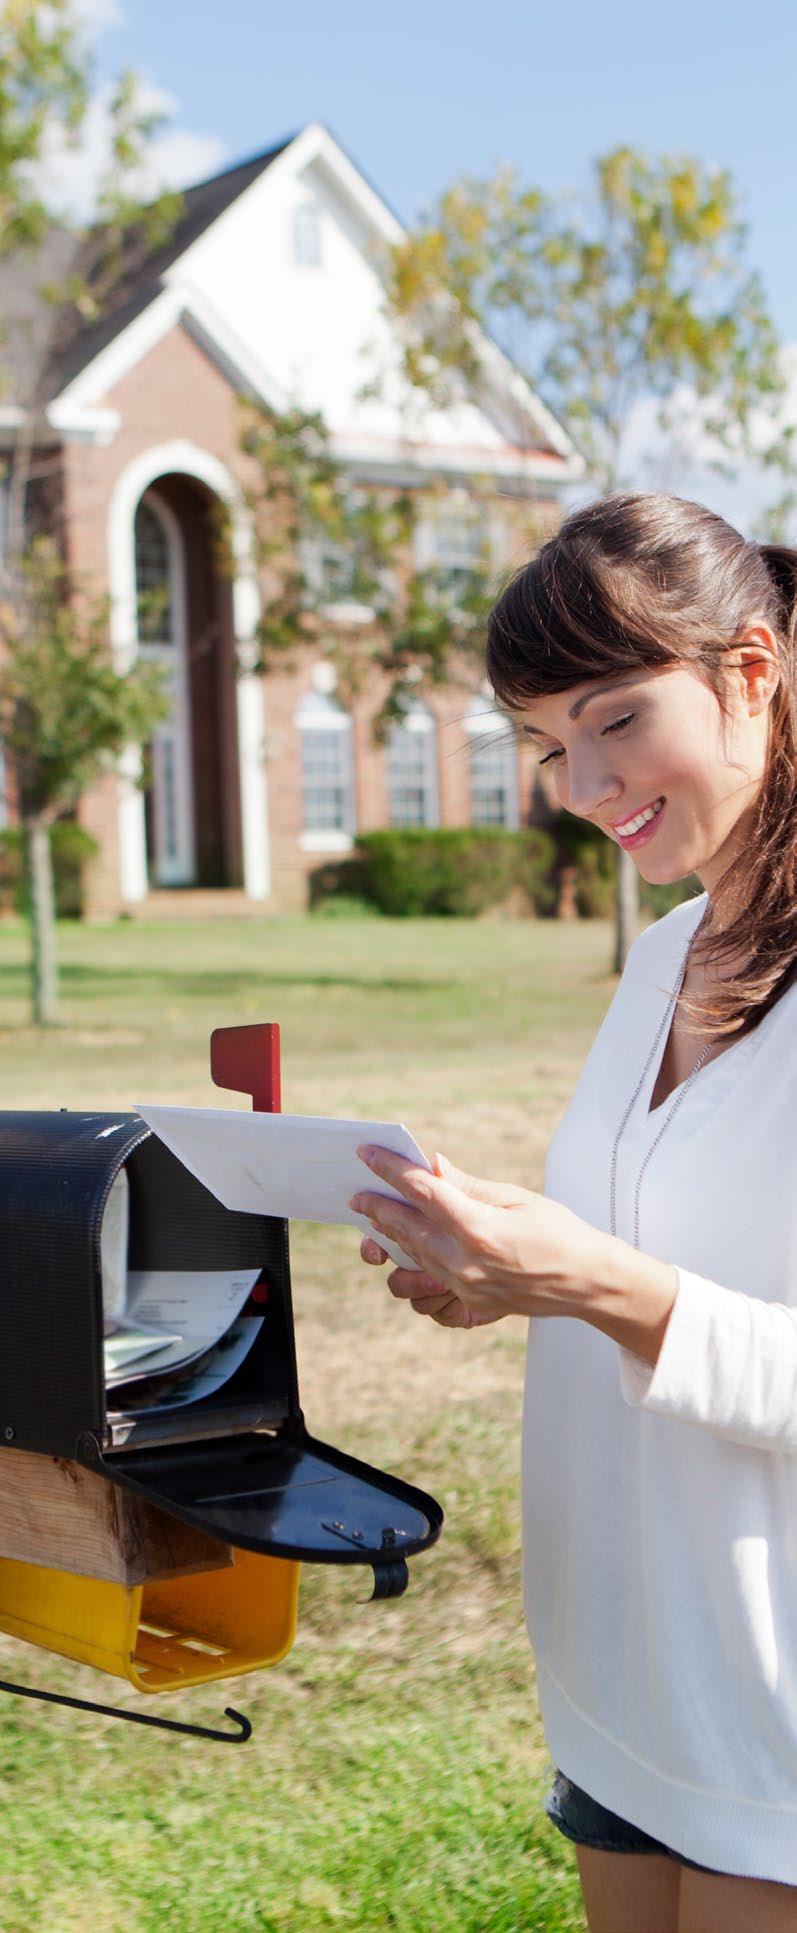 Direct Mail Hand delivered letters remain popular and are a highly successful way to communicate with your donors.